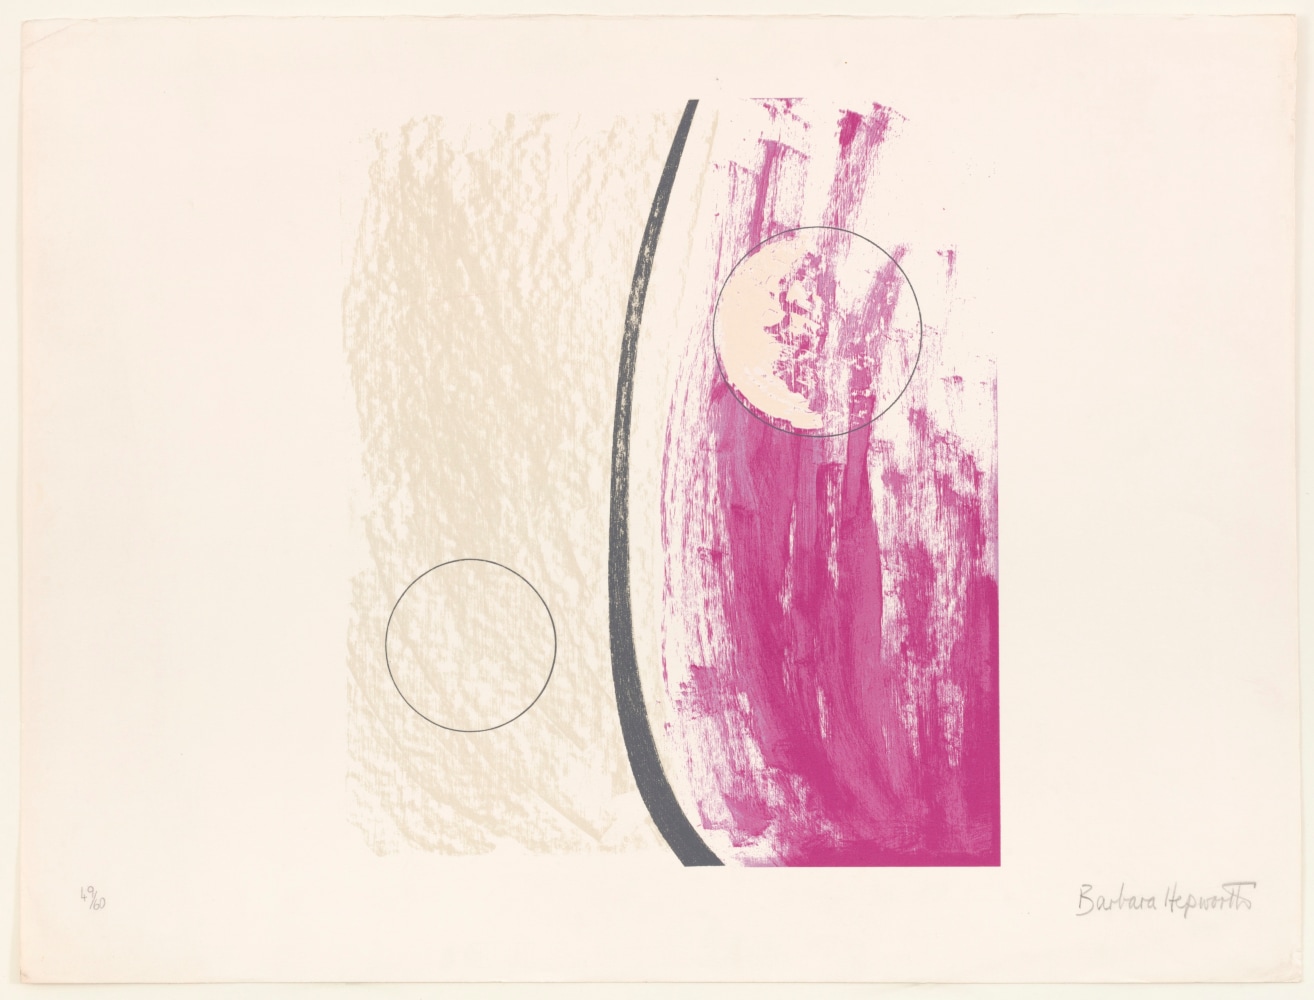 A gestural screenprint from a portfolio of 12 depicting a two toned pink and cream composition divided by a centered curved gray line with a circle on each side by Barbara Hepworth